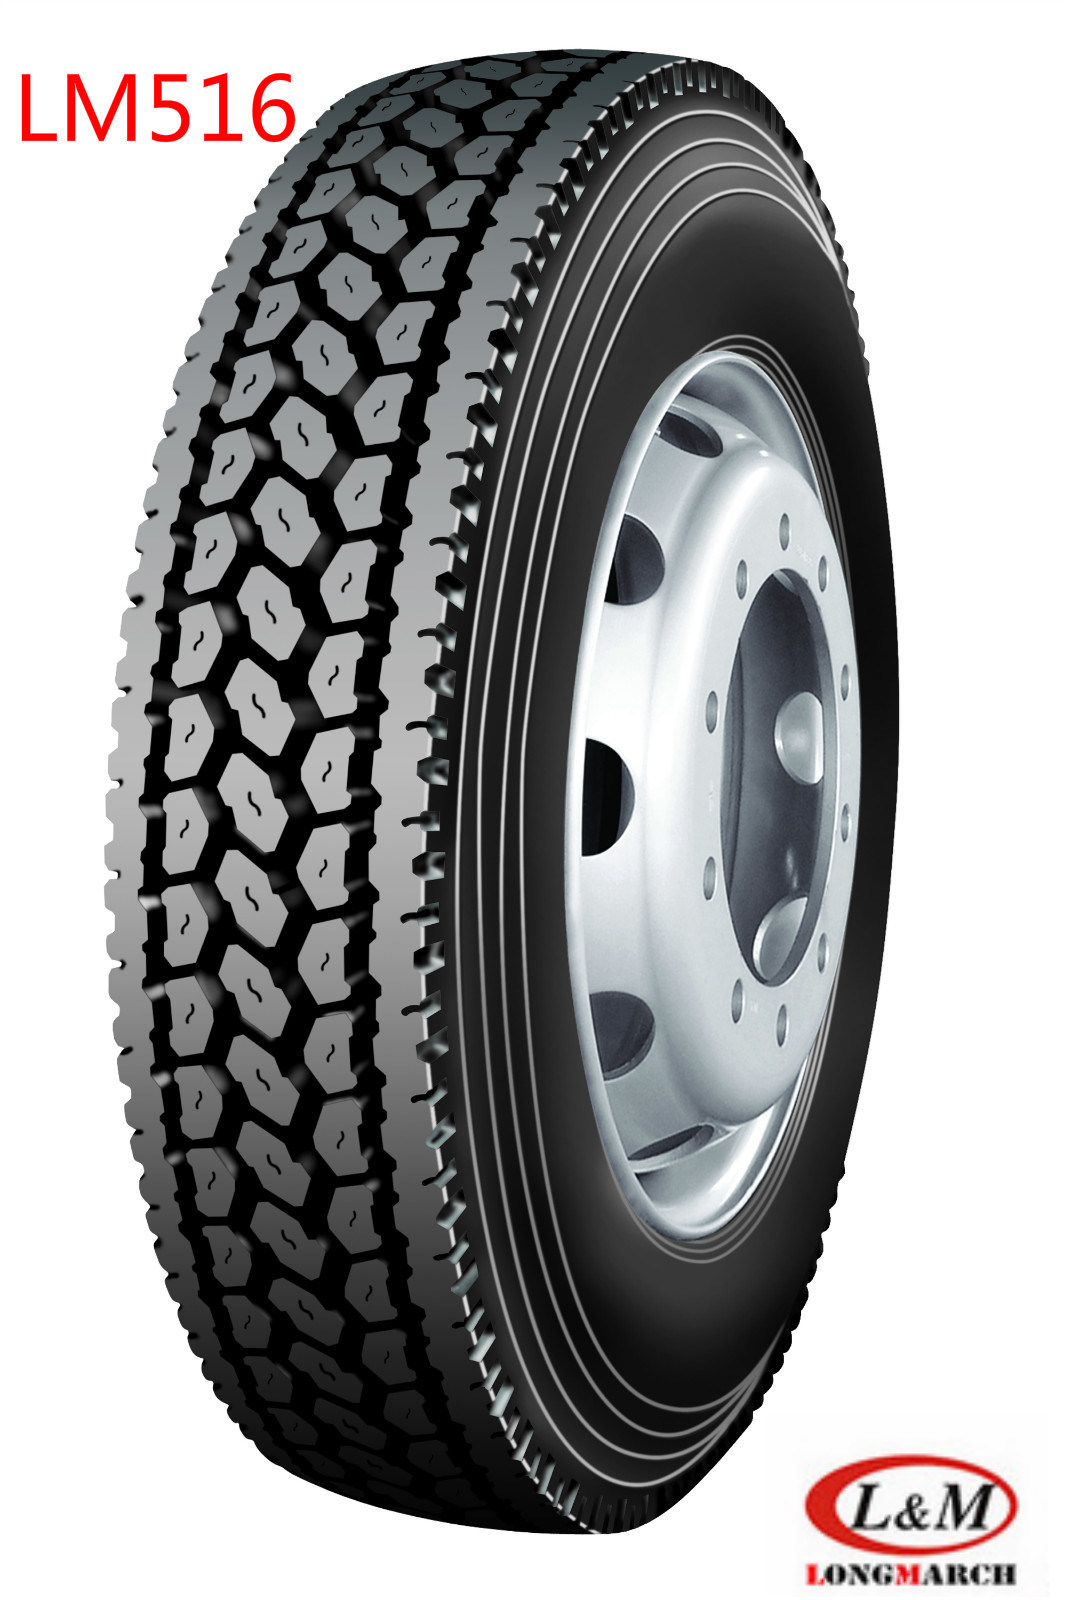 285/75R24.5 Long March / Roadlux Radial Truck Tyre with E-MARK